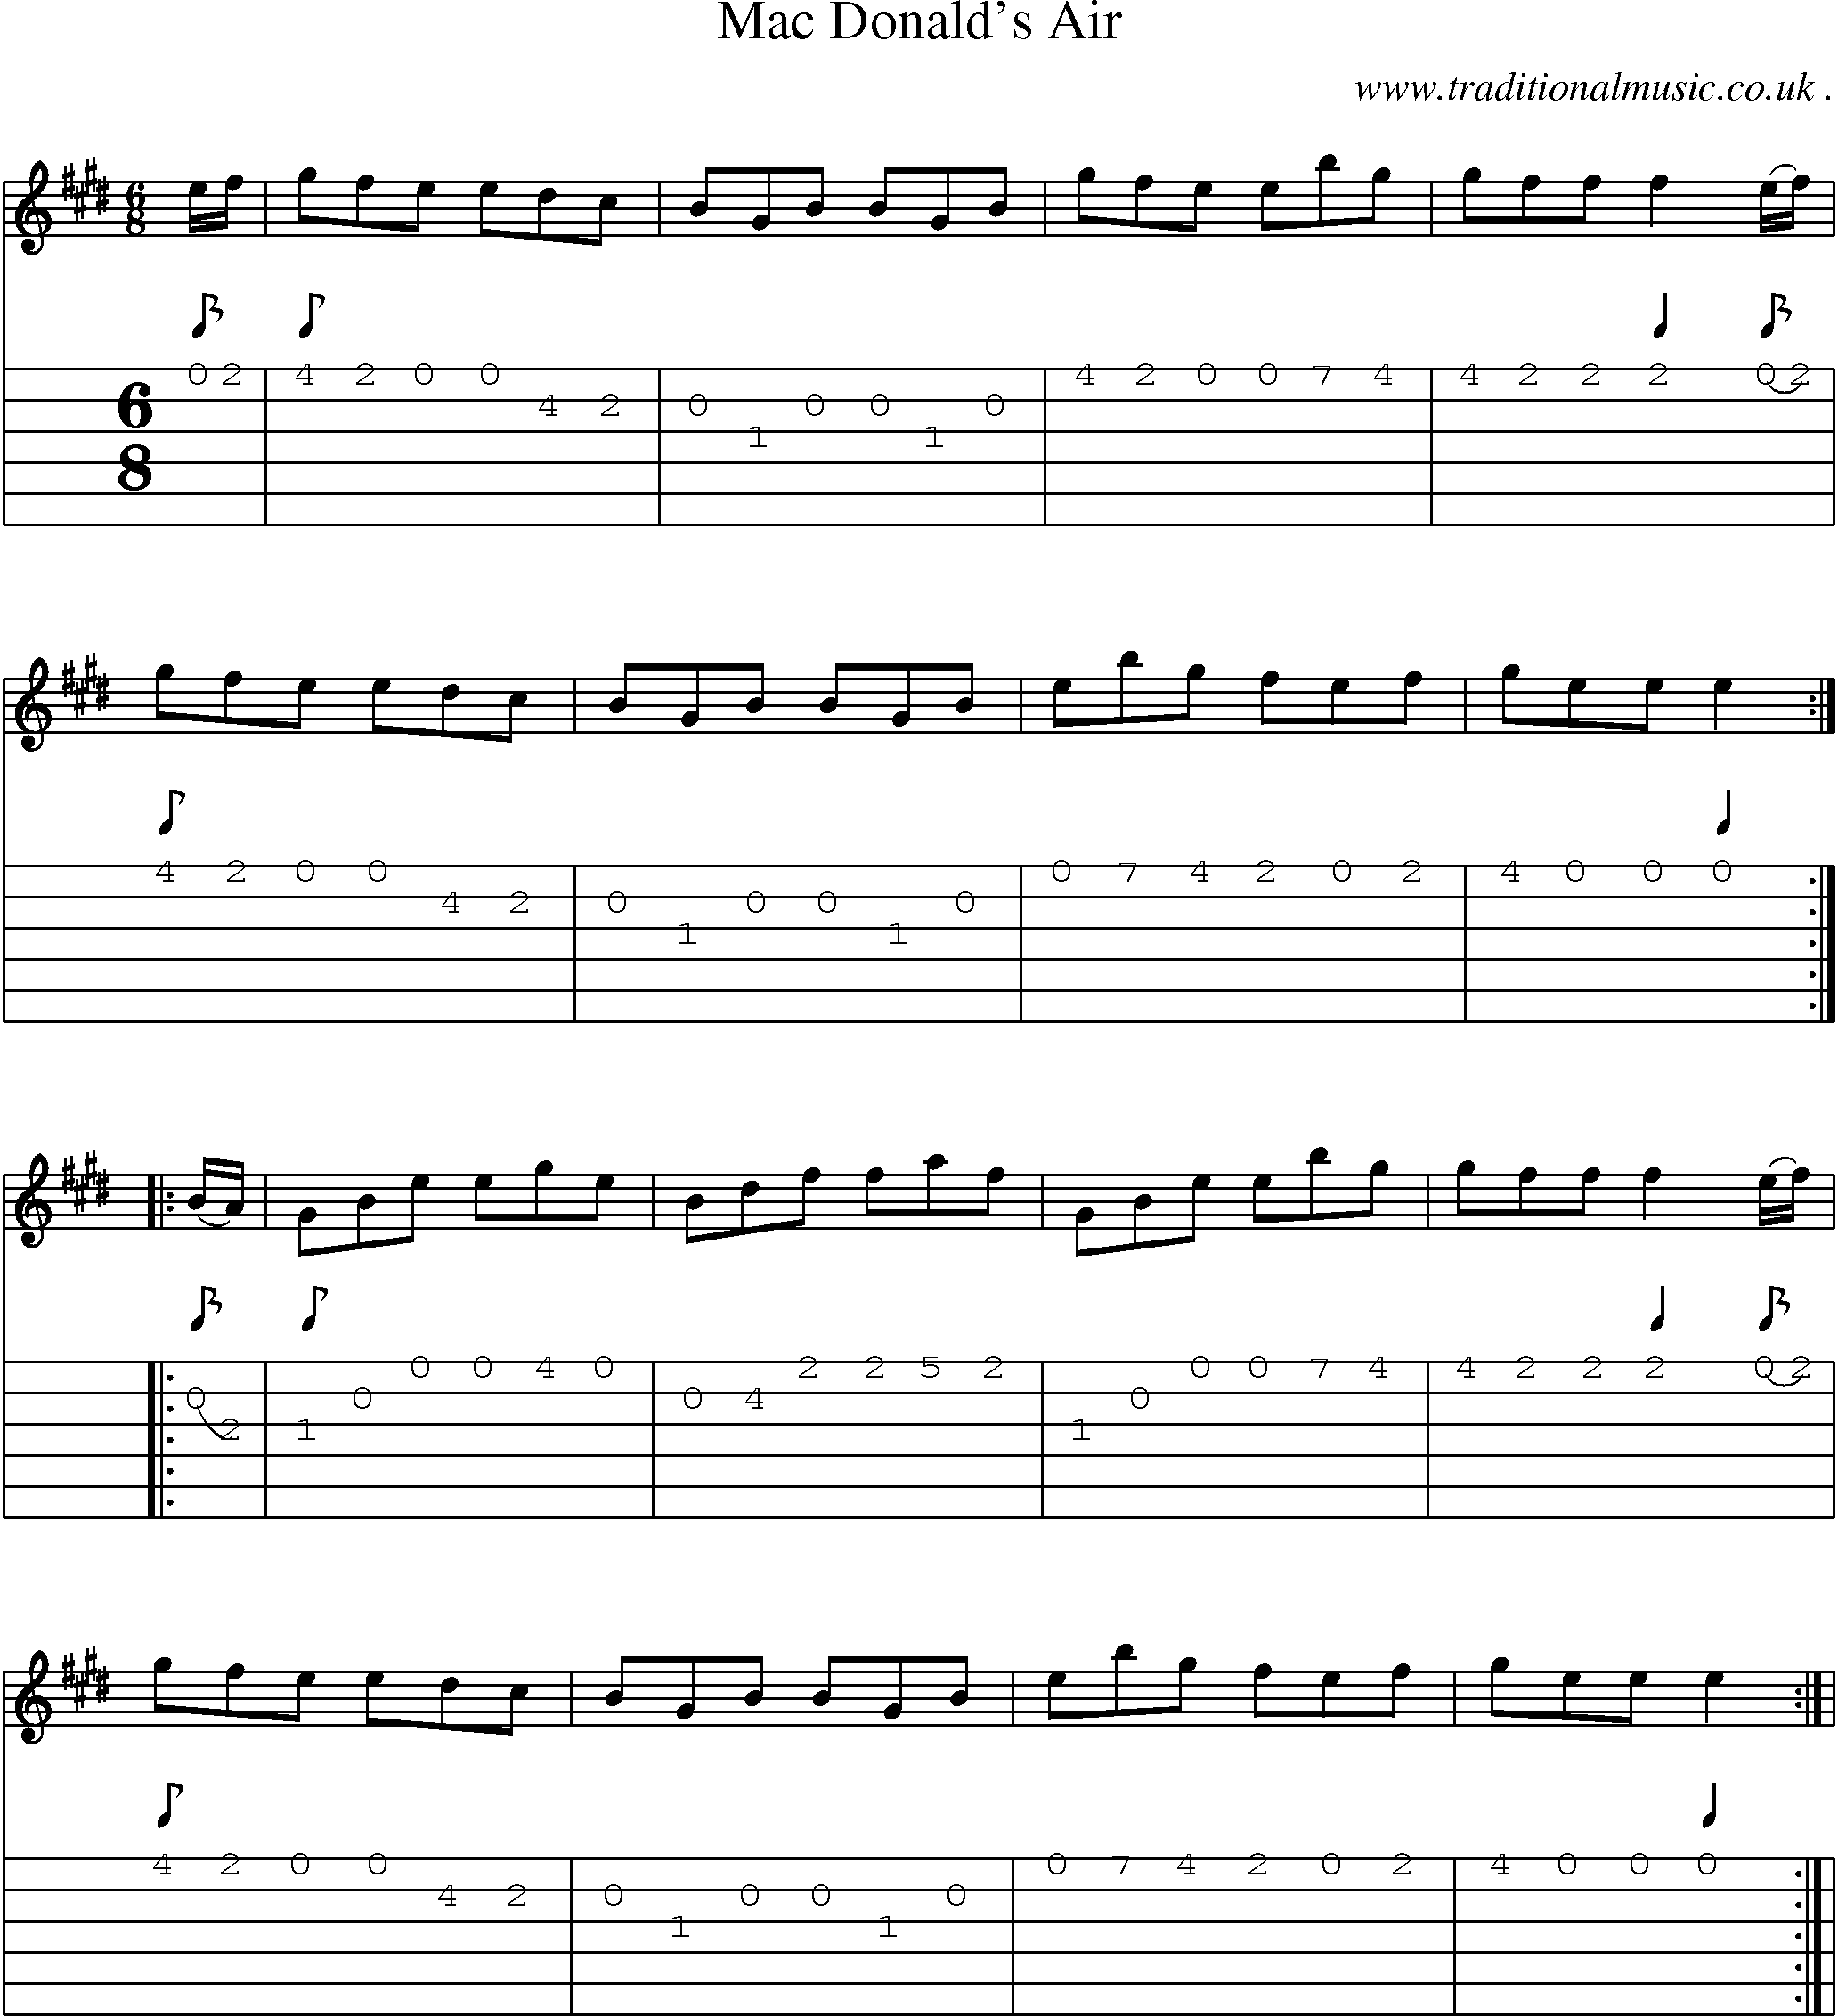 Sheet-Music and Guitar Tabs for Mac Donalds Air